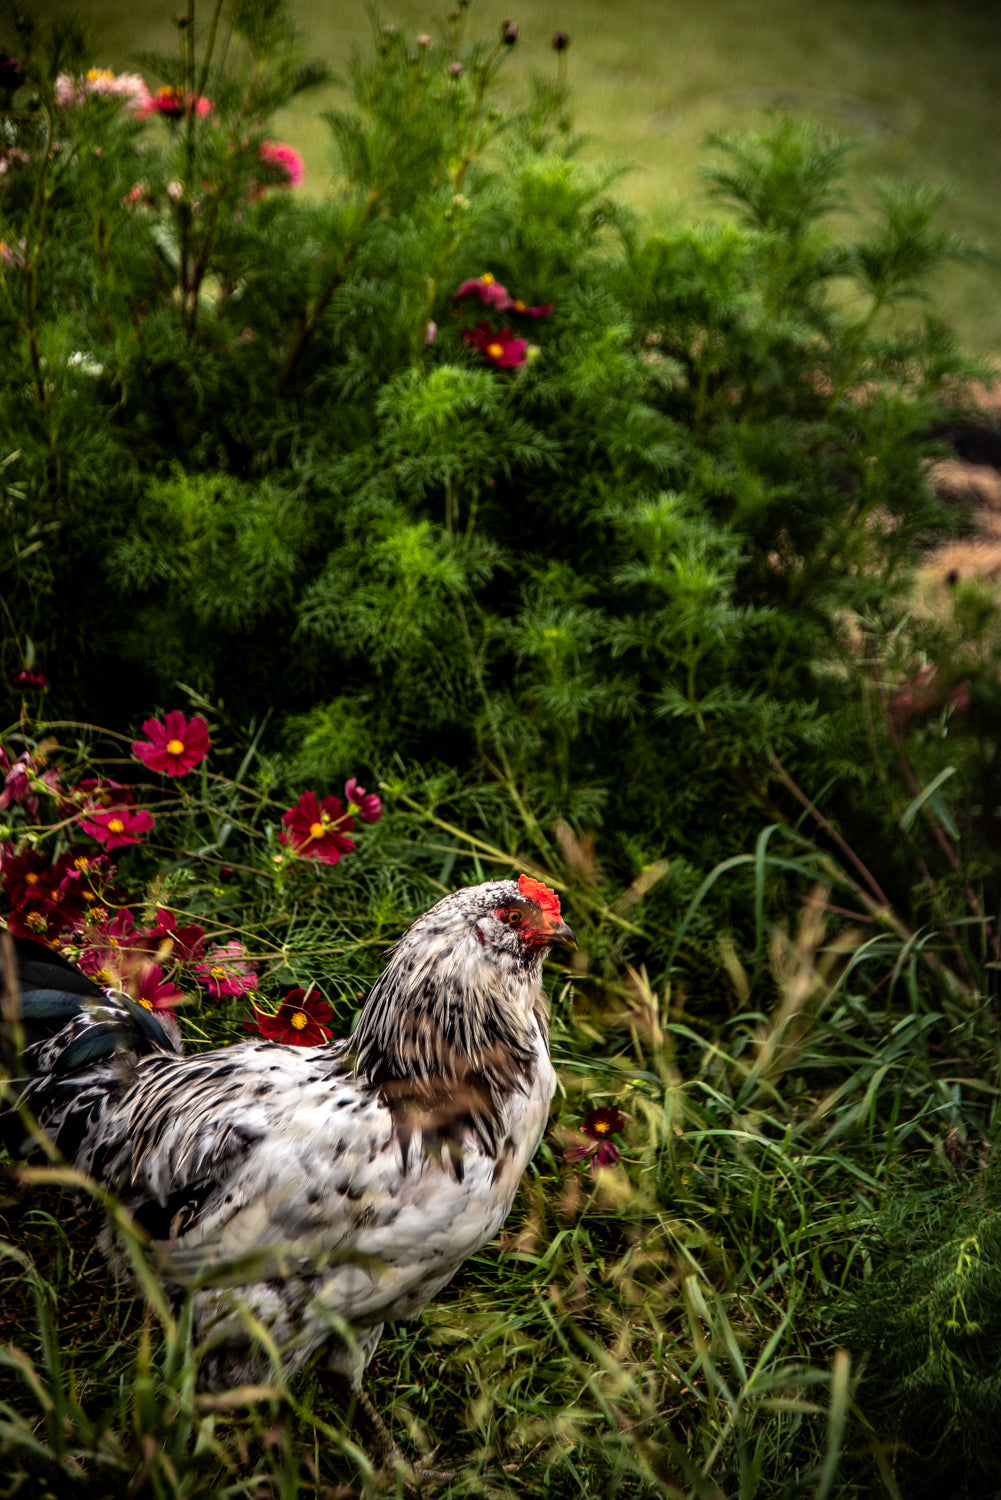 A Chicken hides in long grass among the flowers